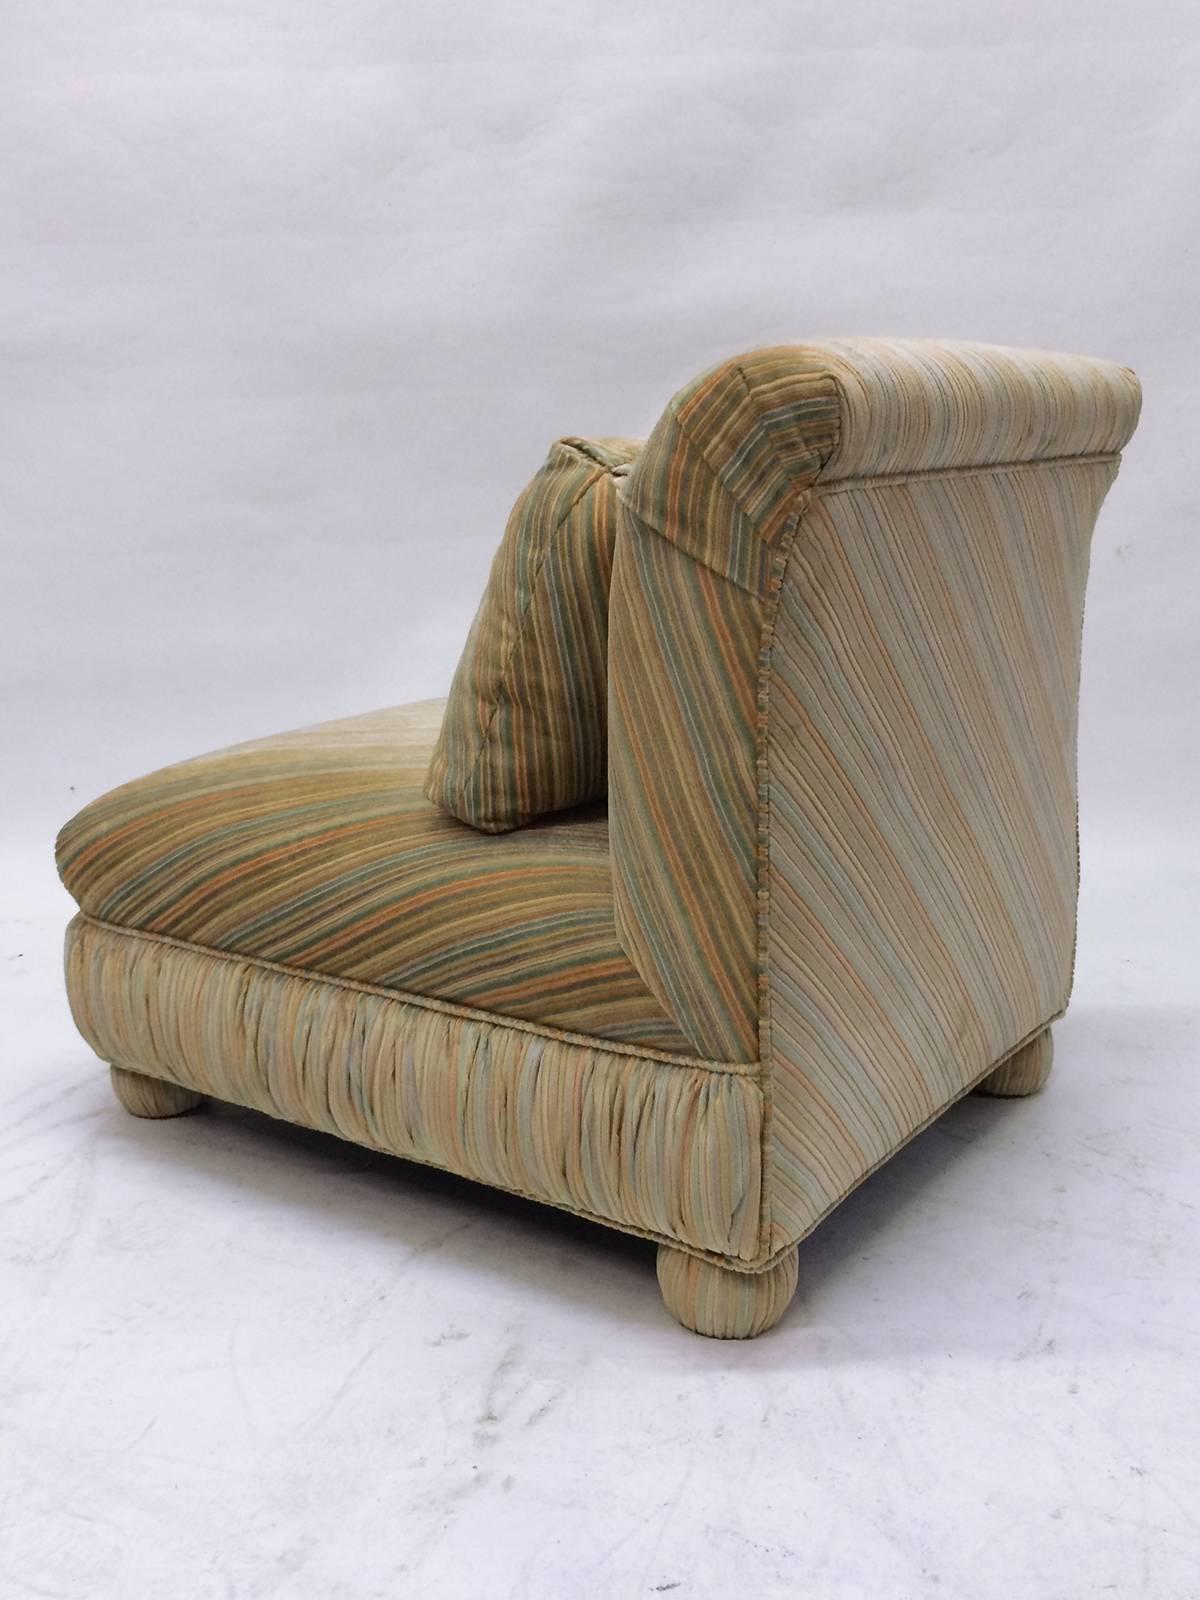 Pair of  slipper chairs by Milo Baughman.  Chairs are both in original striped multicolored velvet dominated by yellows, greens with blue and orange accents.  